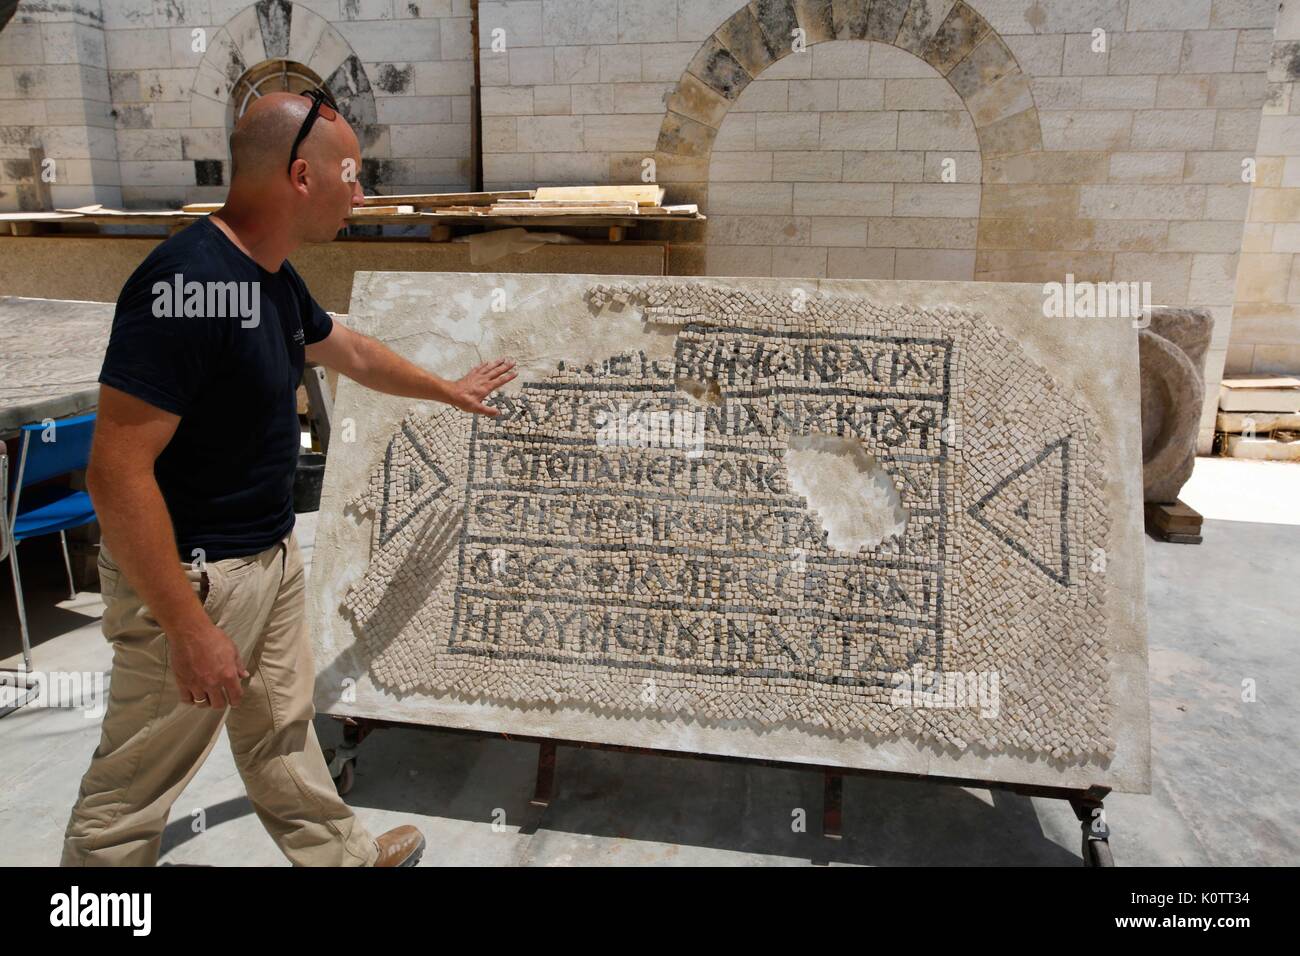 (170823) -- JERUSALEM, Aug. 23, 2017 (Xinhua) -- Israel Antiquities Authority worker Shmulik Frairaich shows and explains a 1,500-year-old mosaic floor at the Israel Antiquities Authority mosaic workshop in the Rockefeller museum in Jerusalem, on Aug. 23, 2017. The Greek inscription mentioning the Byzantine emperor Justinian, was exposed on a mosaic floor in a room that was probably used as a hostel for pilgrims, according to Israel Antiquities Authority. A 1,500-year-old mosaic floor, with a Greek inscription, was discovered this summer following groundwork for Partner communications cable in Stock Photo